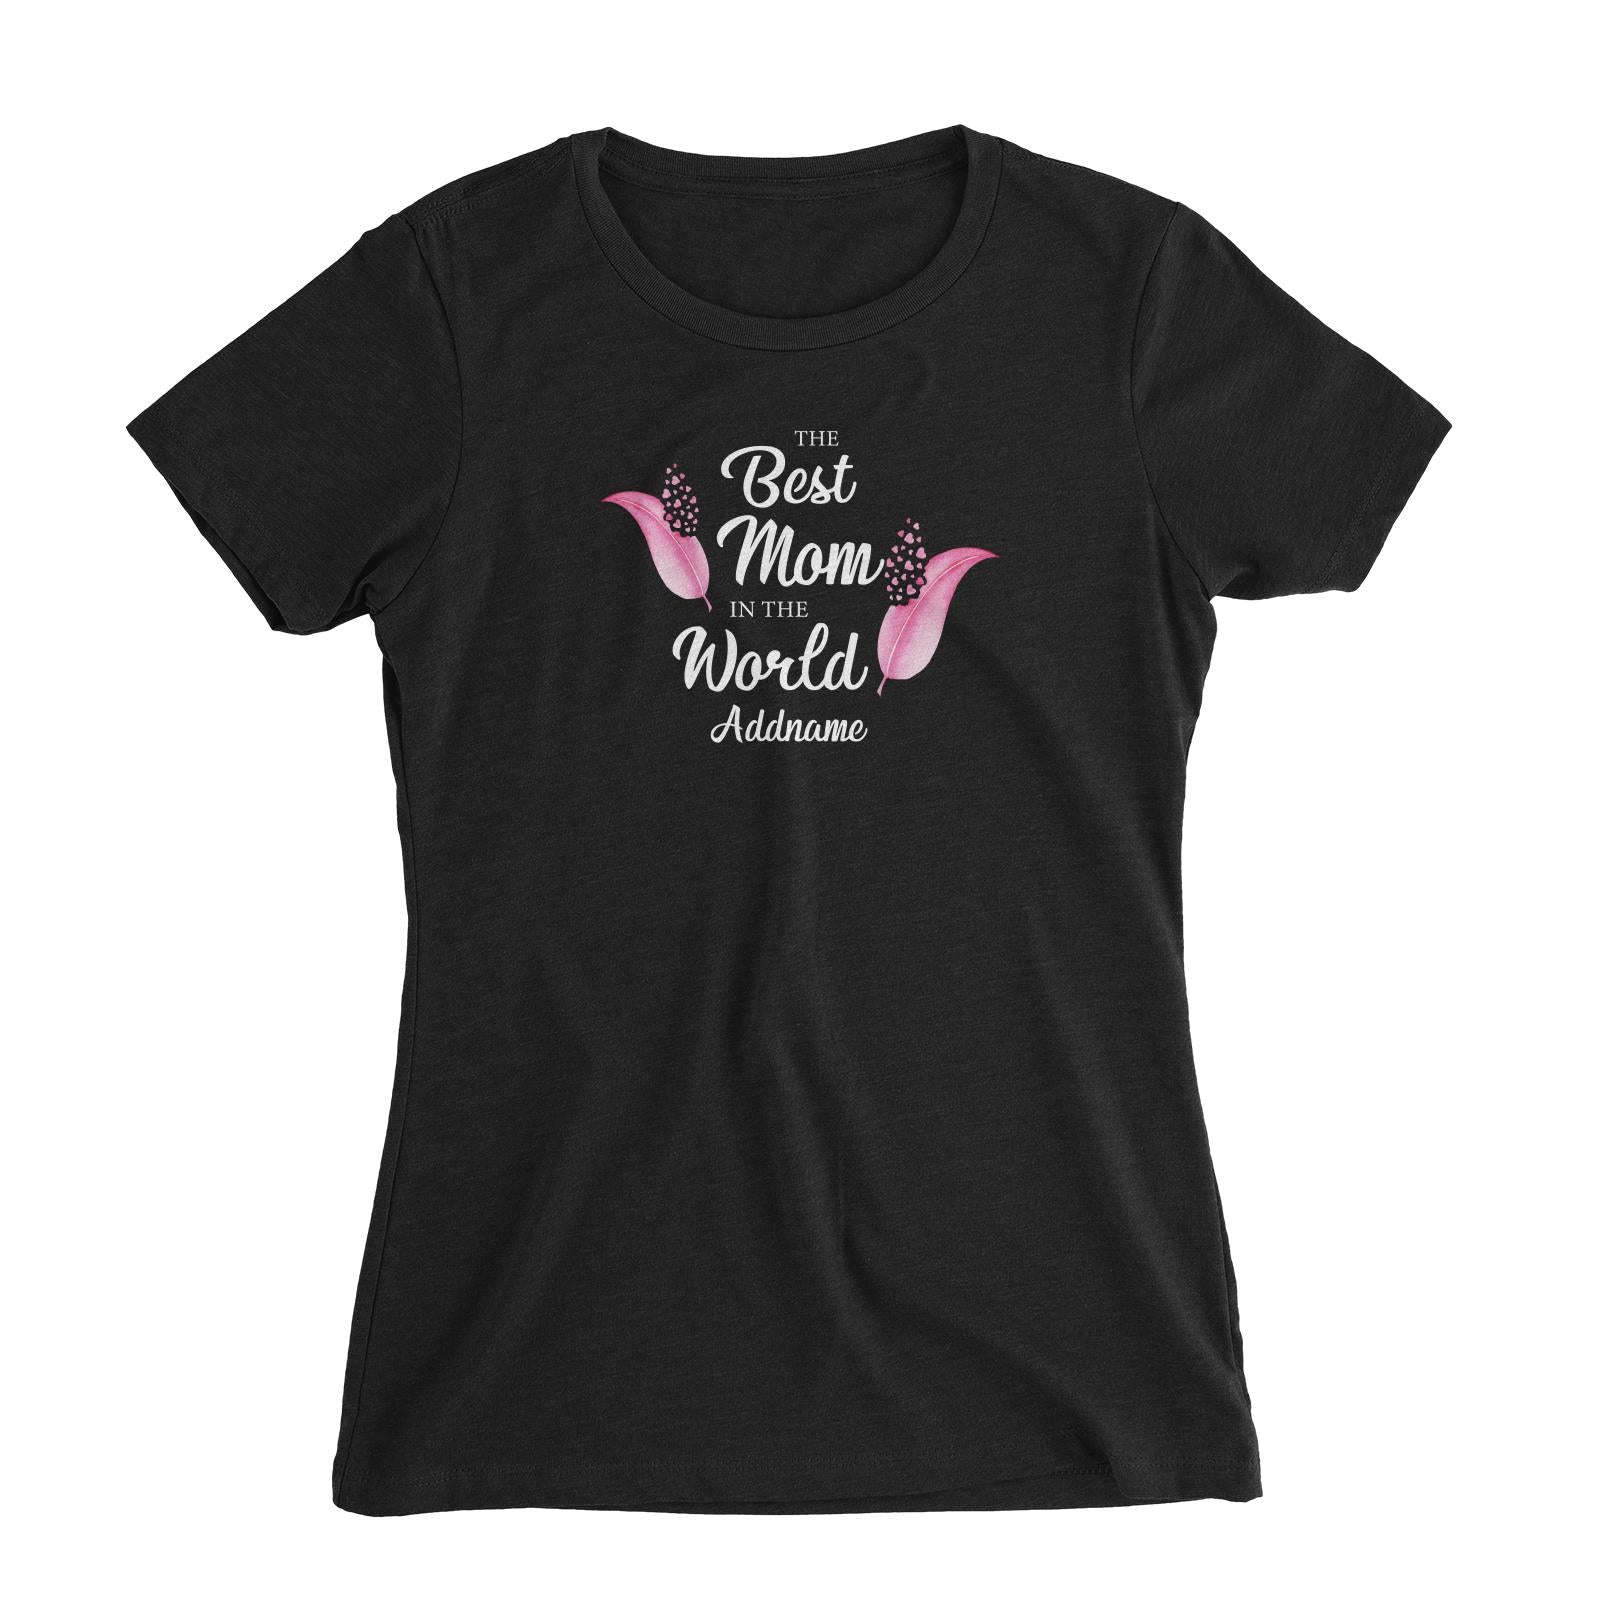 Sweet Mom Quotes 1 Love Feathers The Best Mom In The World Addname Women's Slim Fit T-Shirt